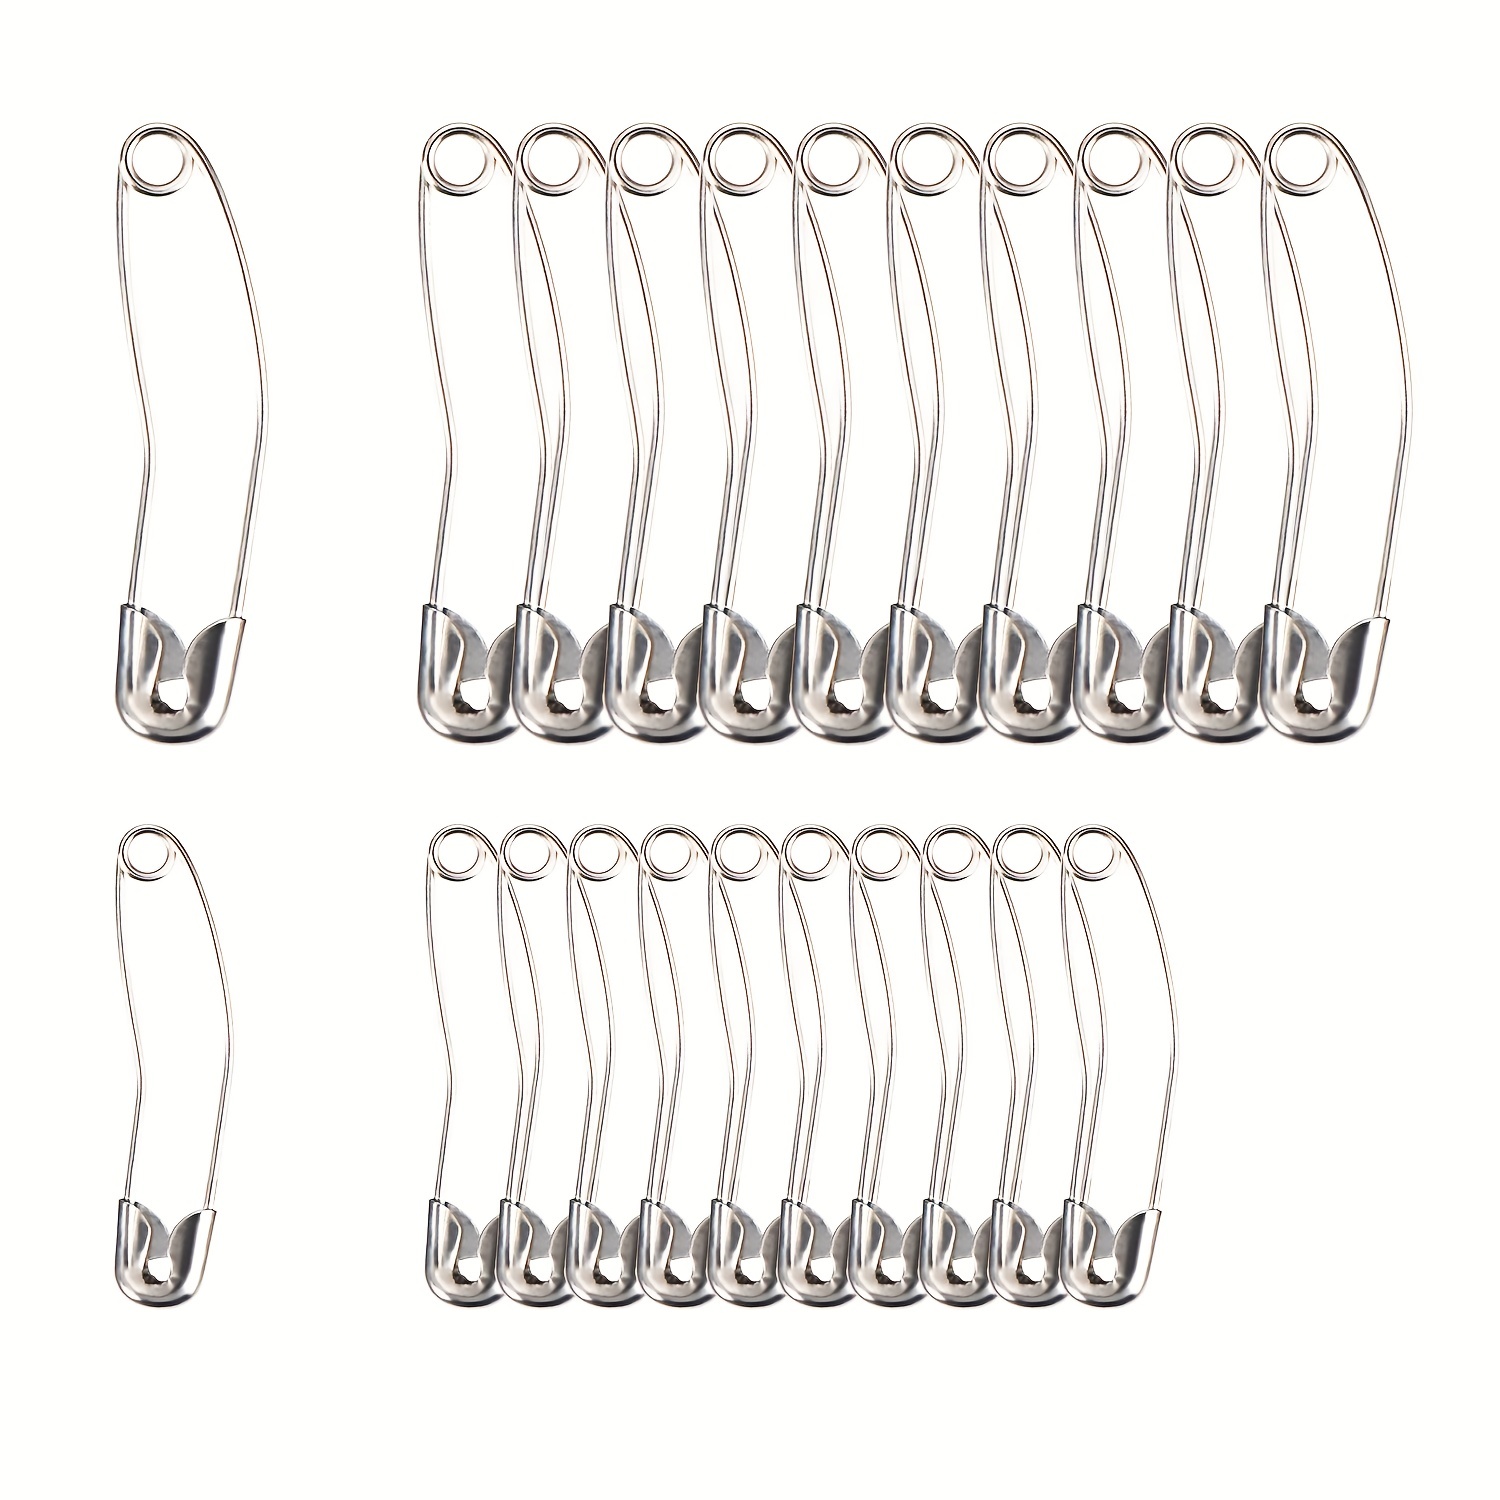 100Pcs Quilting Safety Pins Curved, Quilting Pins Quilting Safety